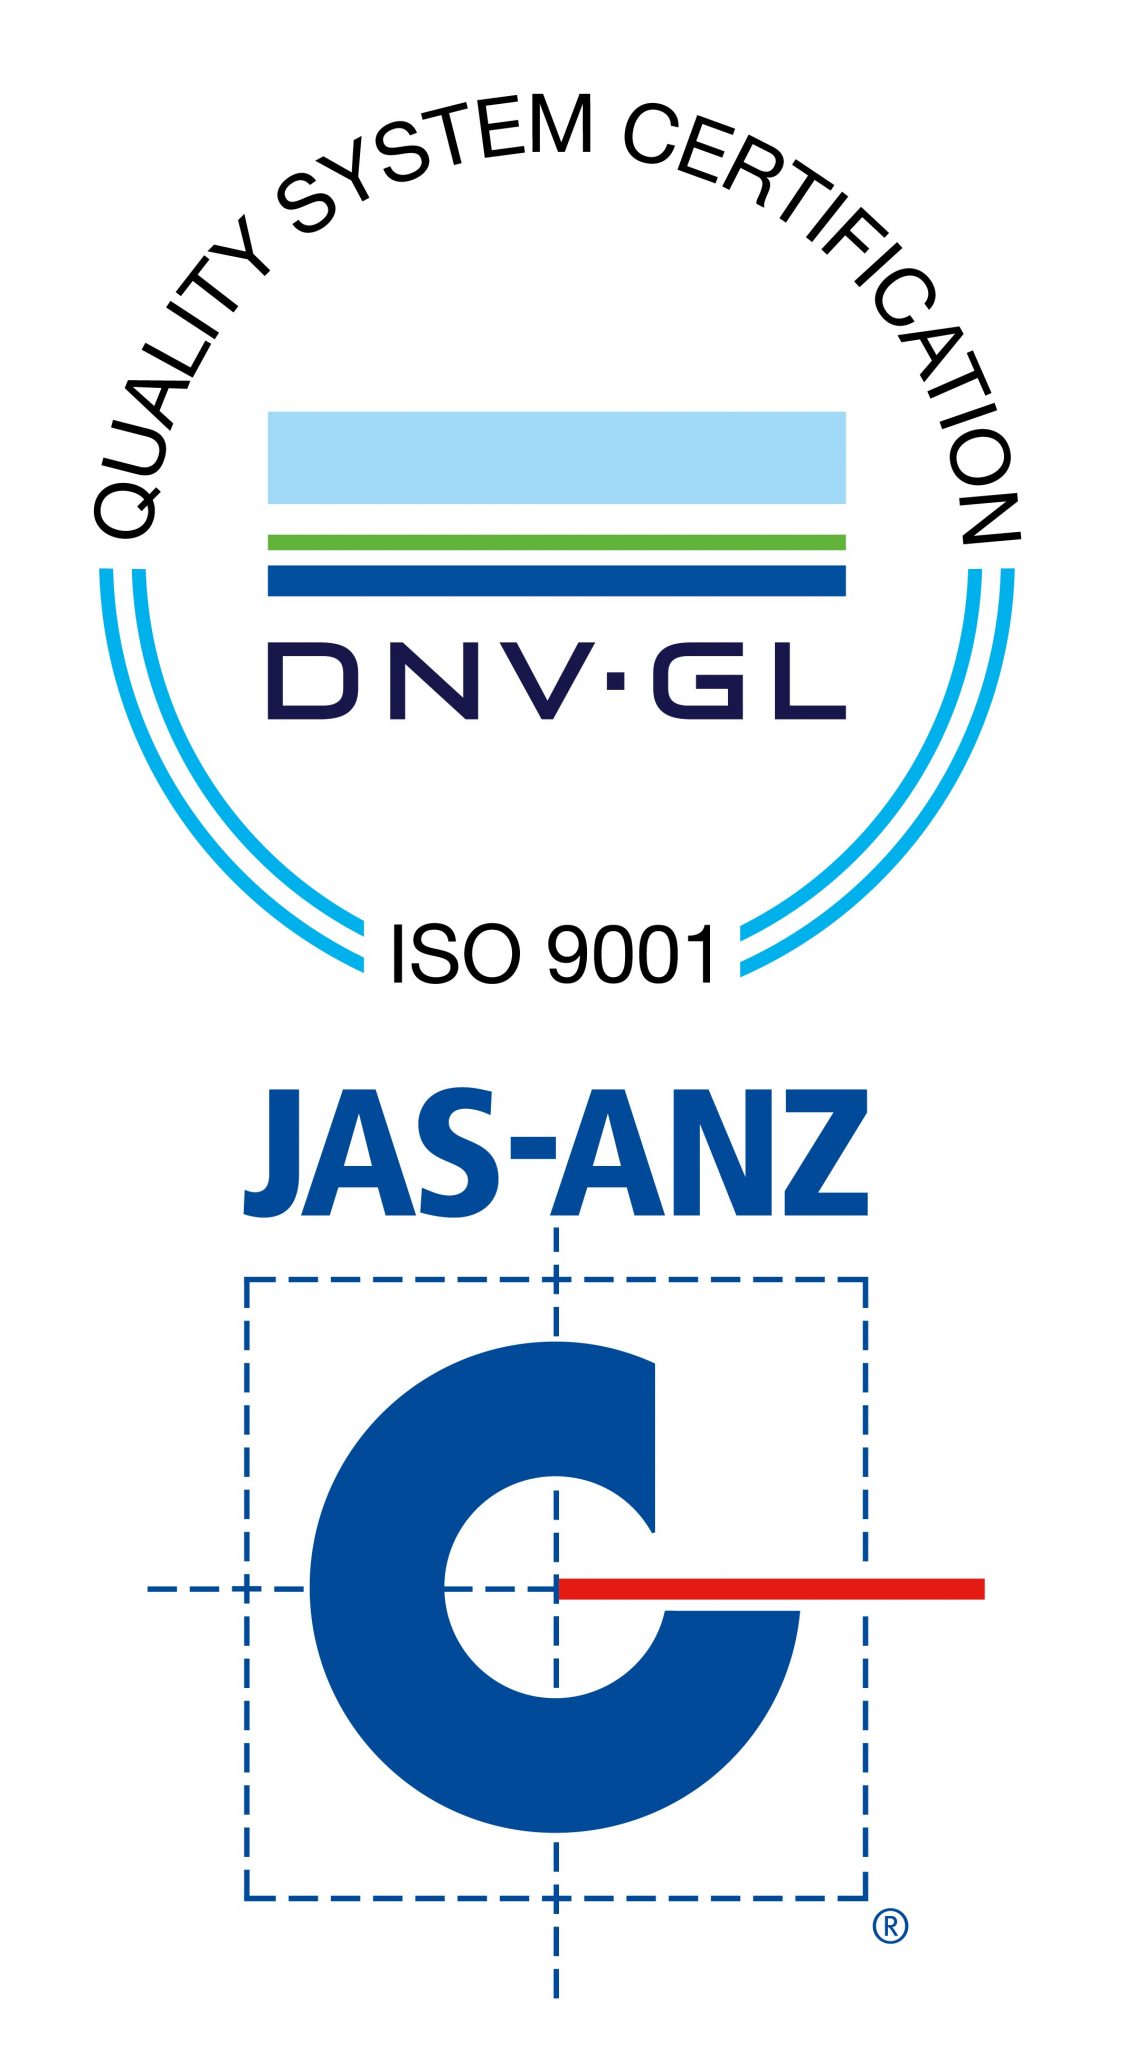 Jas Anz Accrediated ISO 9001 Certificate at Rs 45000/year in Noida